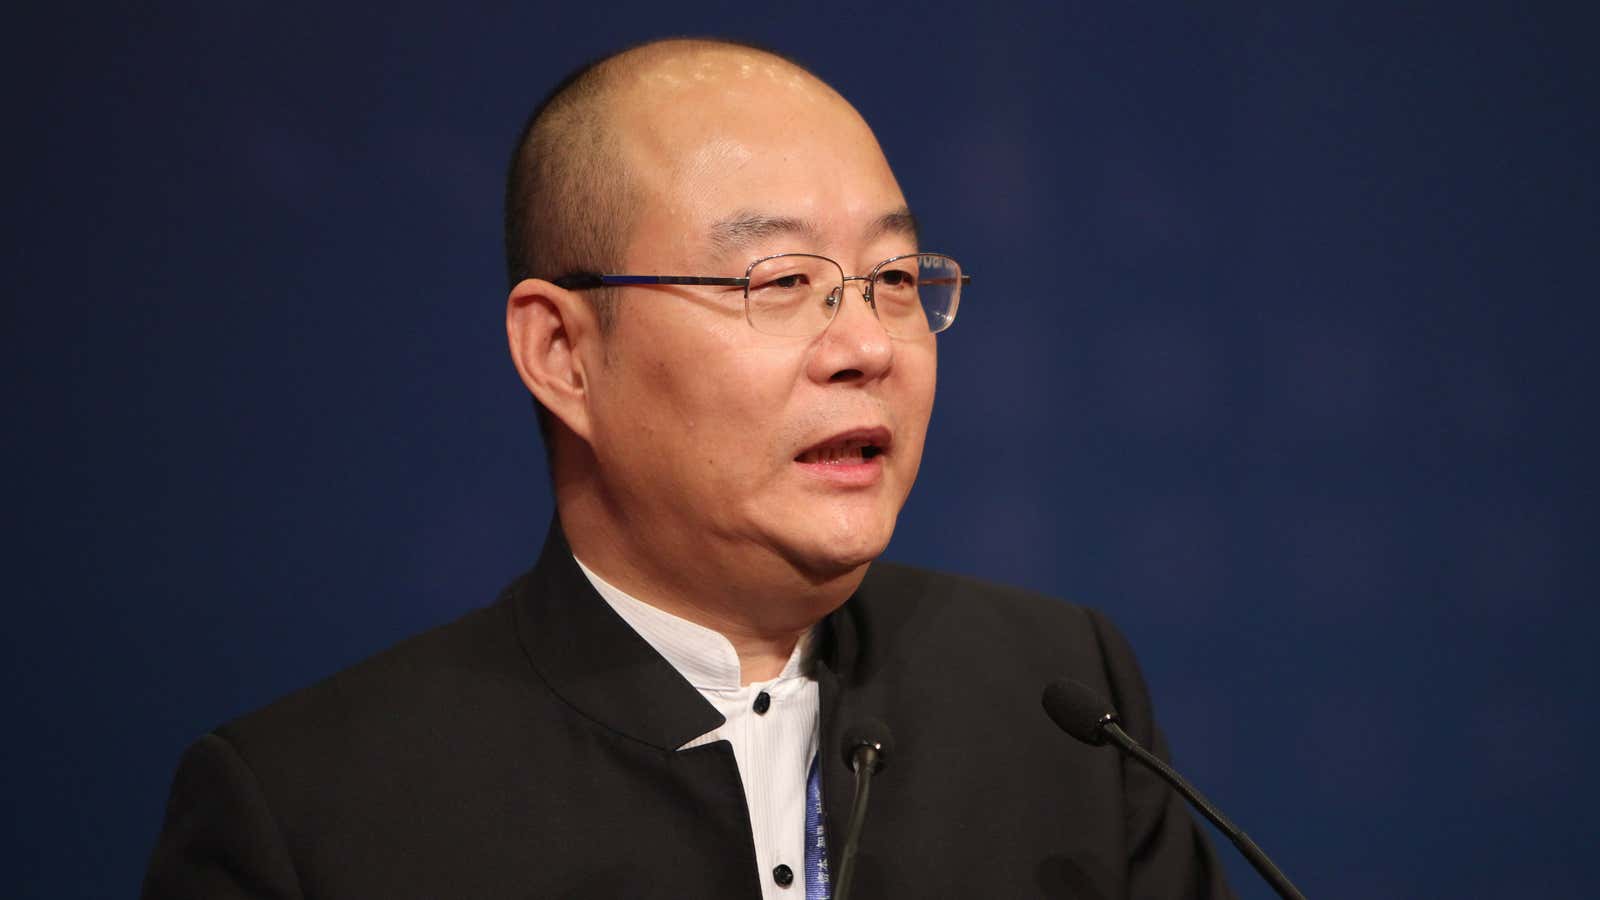 Zhisland founder Liu Donghua speaks at the Global CEO Conference in 2012.